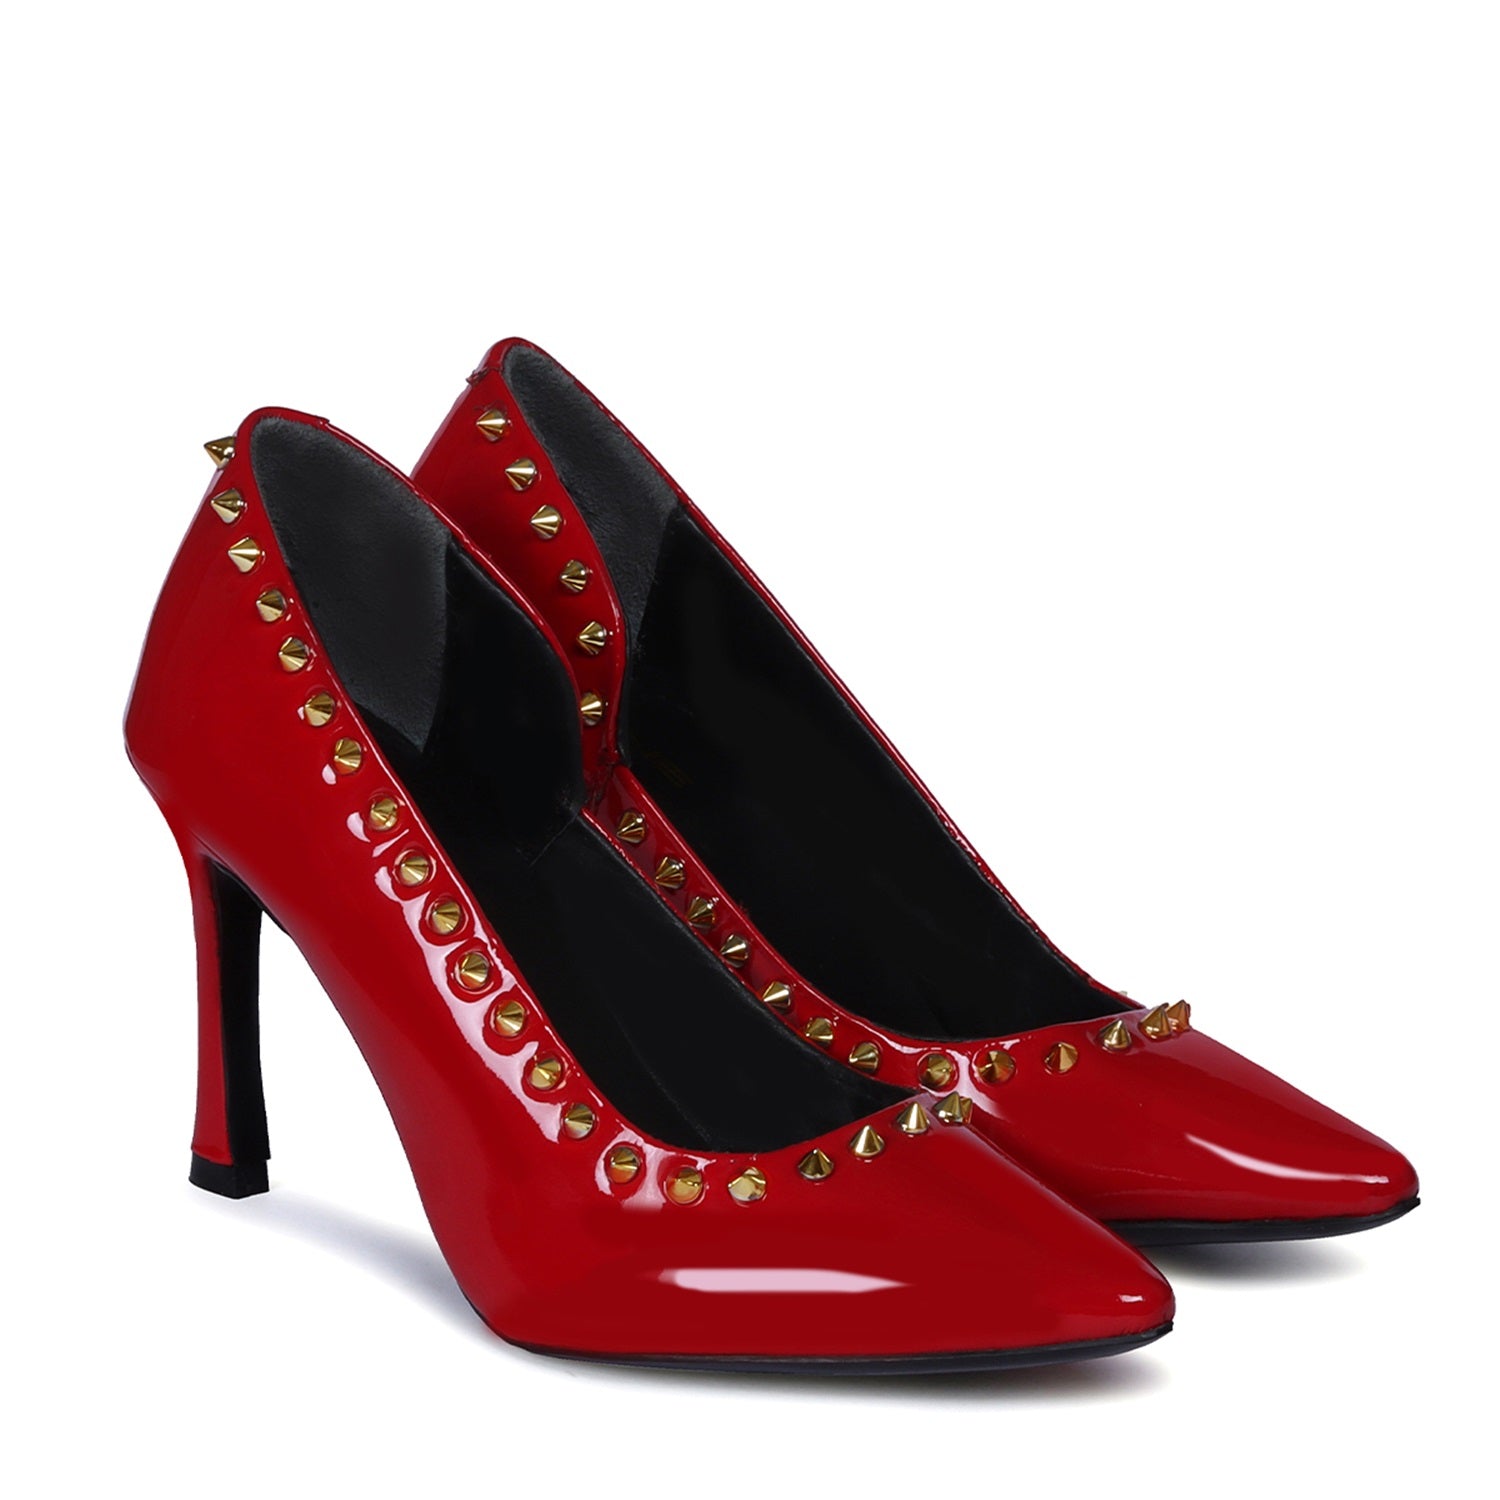 Charming Royal Red Patent Leather With Golden Stud Comfort Ladies Fluted High Heel Pumps Pointed Toe Footwear By Brune & Bareskin